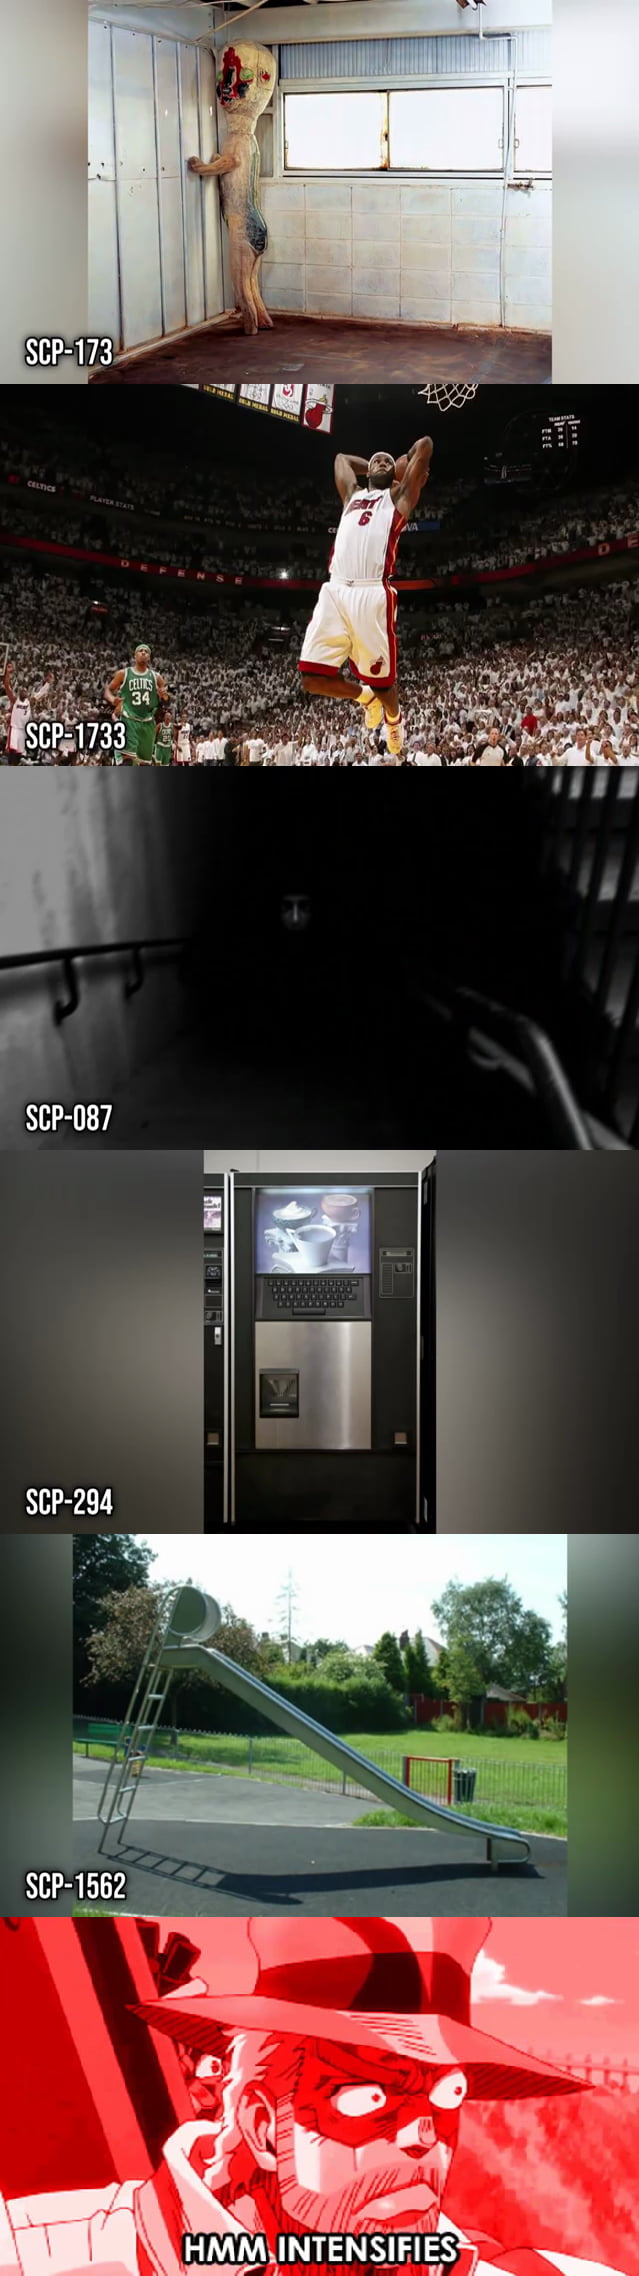 Aren't SCP's just Stands? just started reading some lore - 9GAG